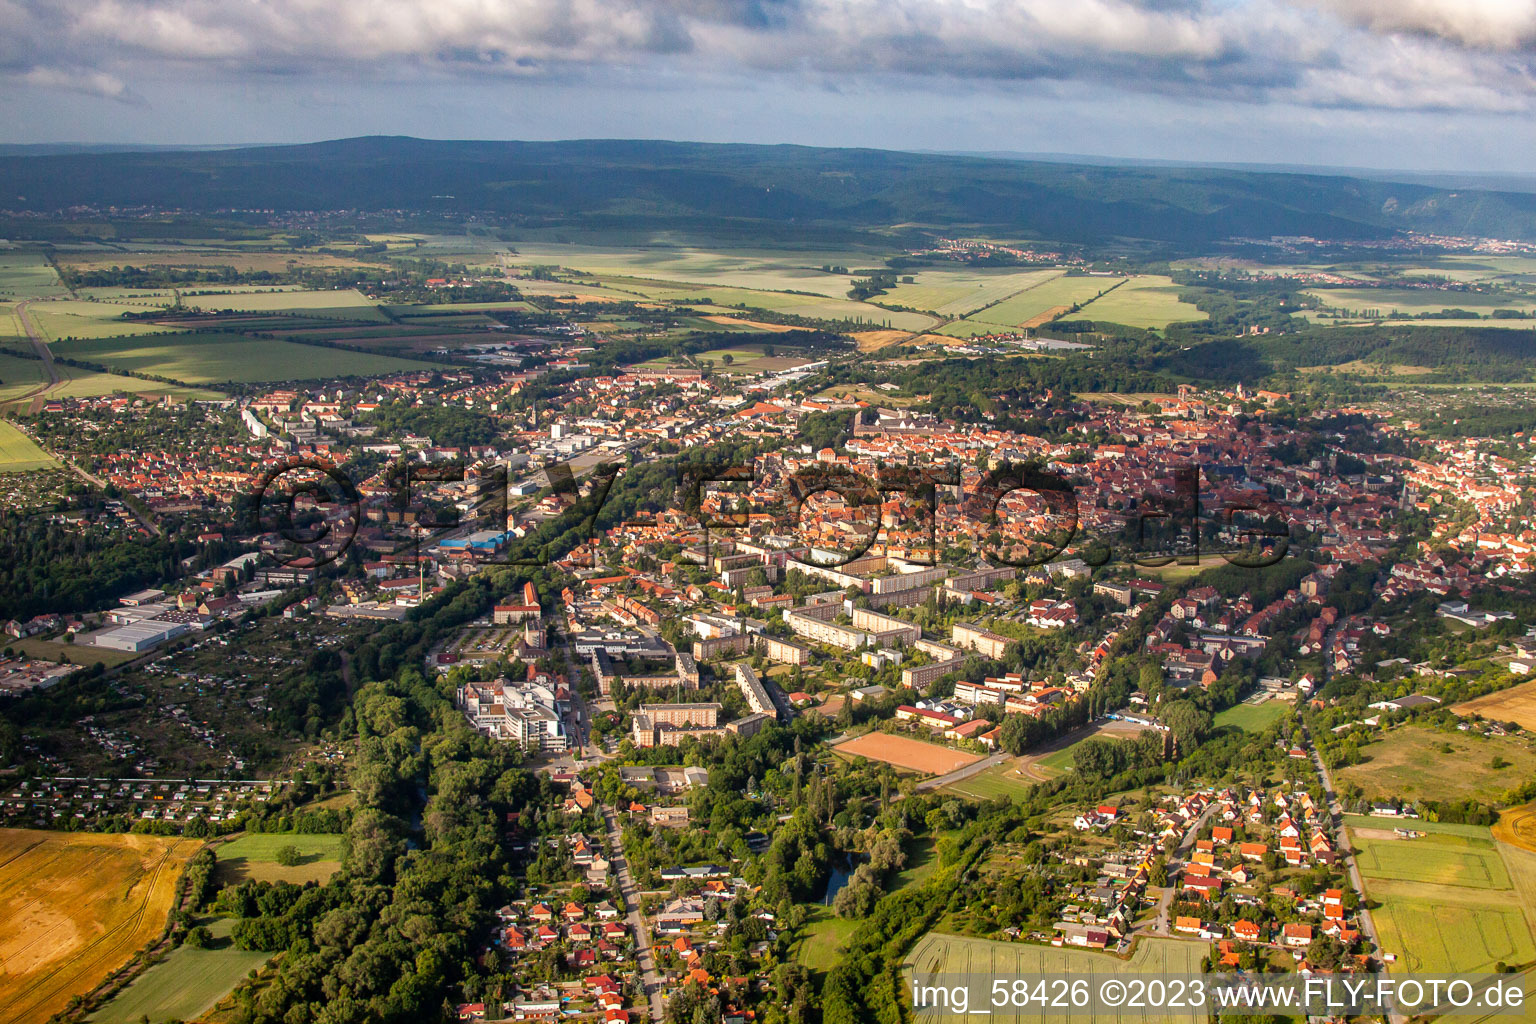 From the northeast in Quedlinburg in the state Saxony-Anhalt, Germany